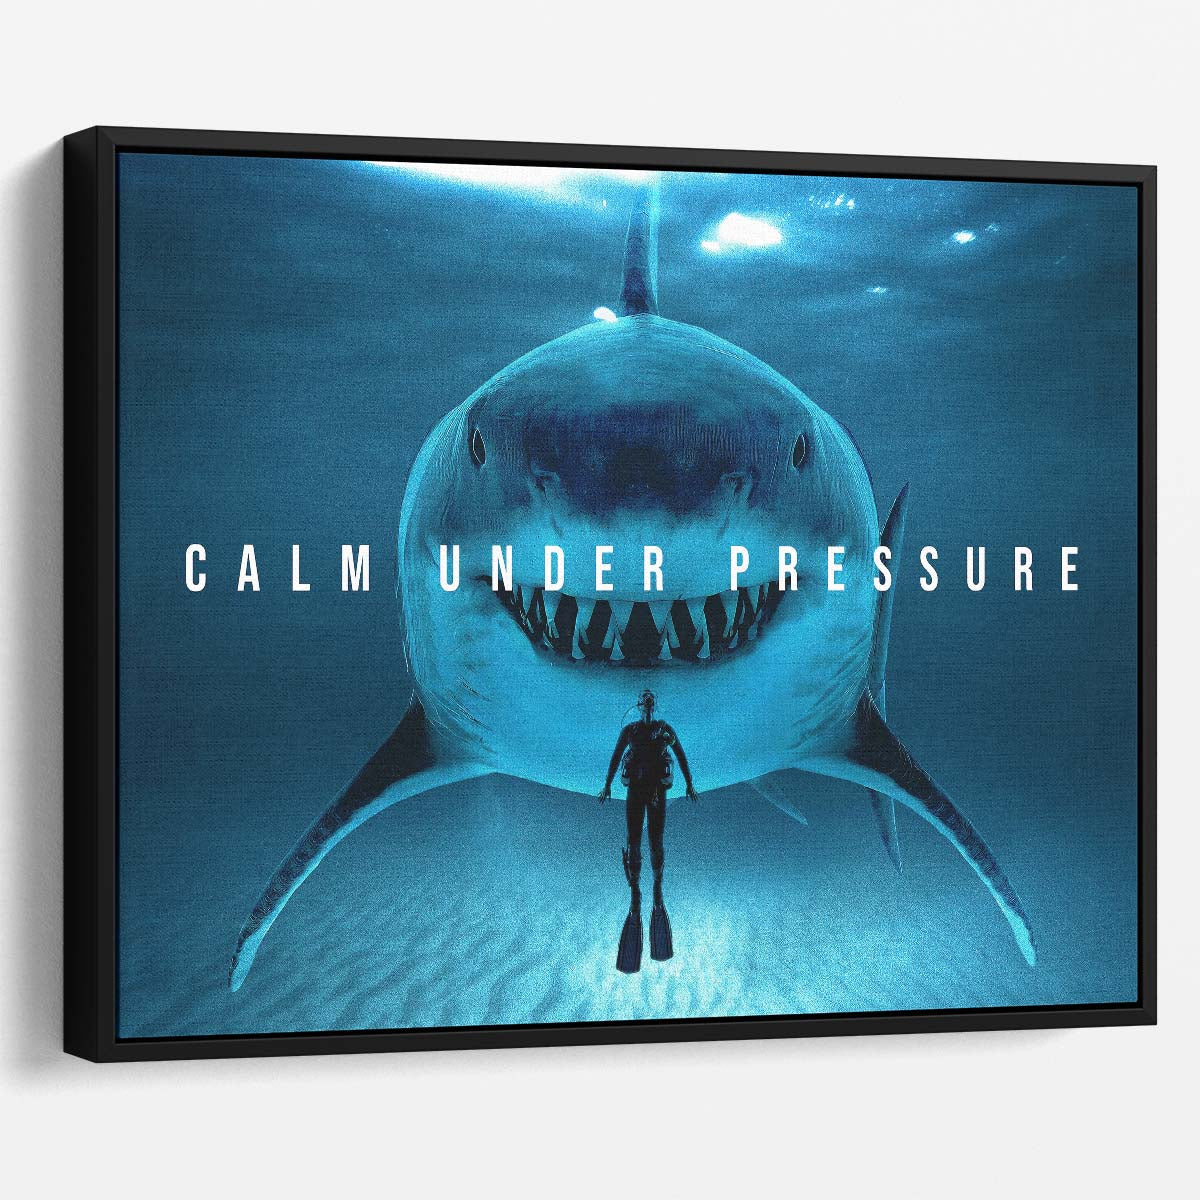 Calm Under Pressure Wall Art by Luxuriance Designs. Made in USA.